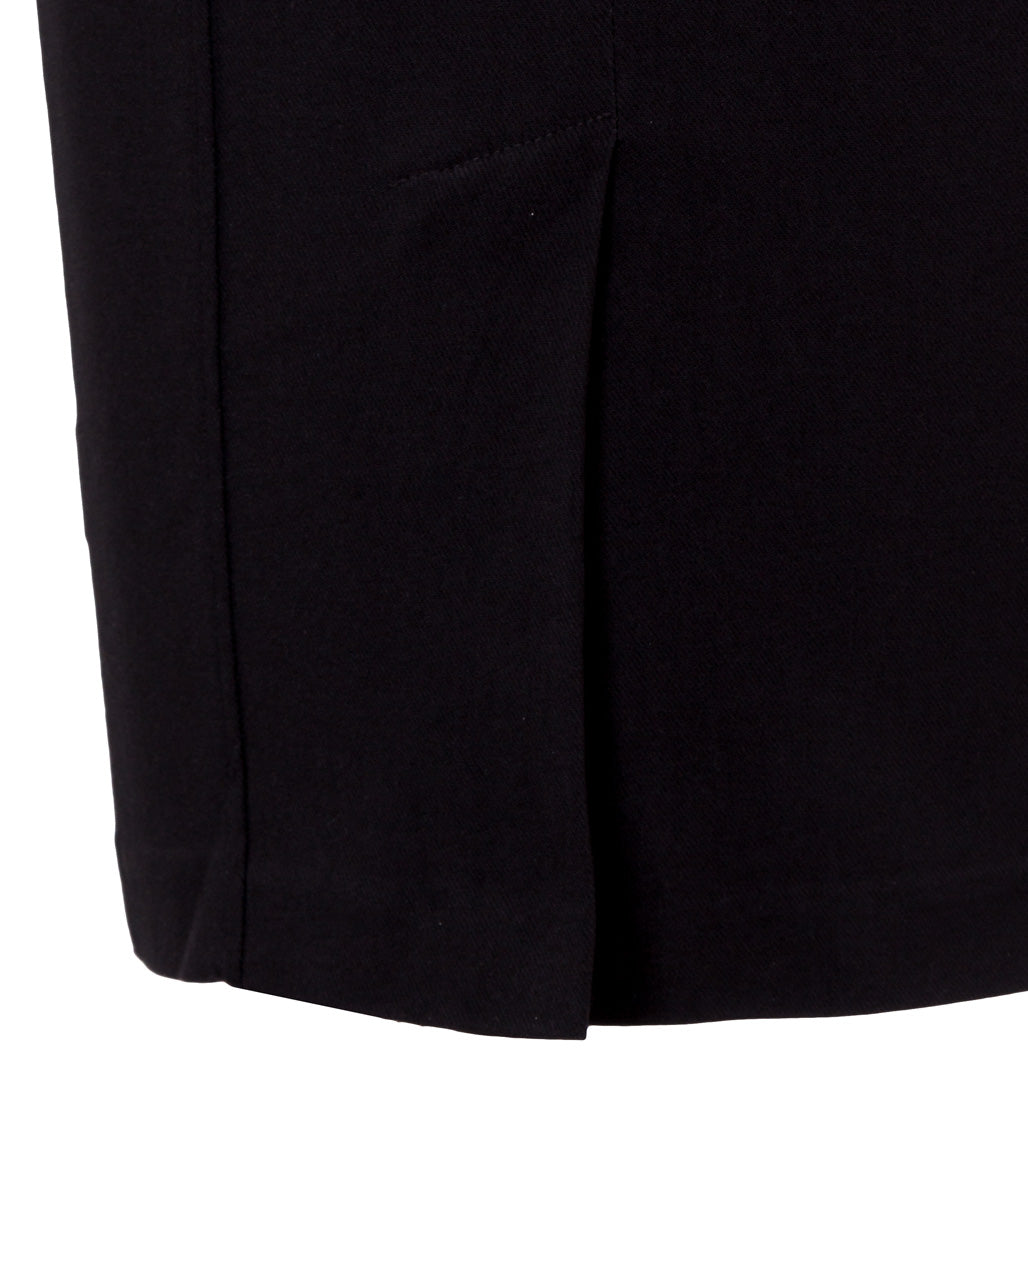 Black high waisted stretch skirt showing back detail